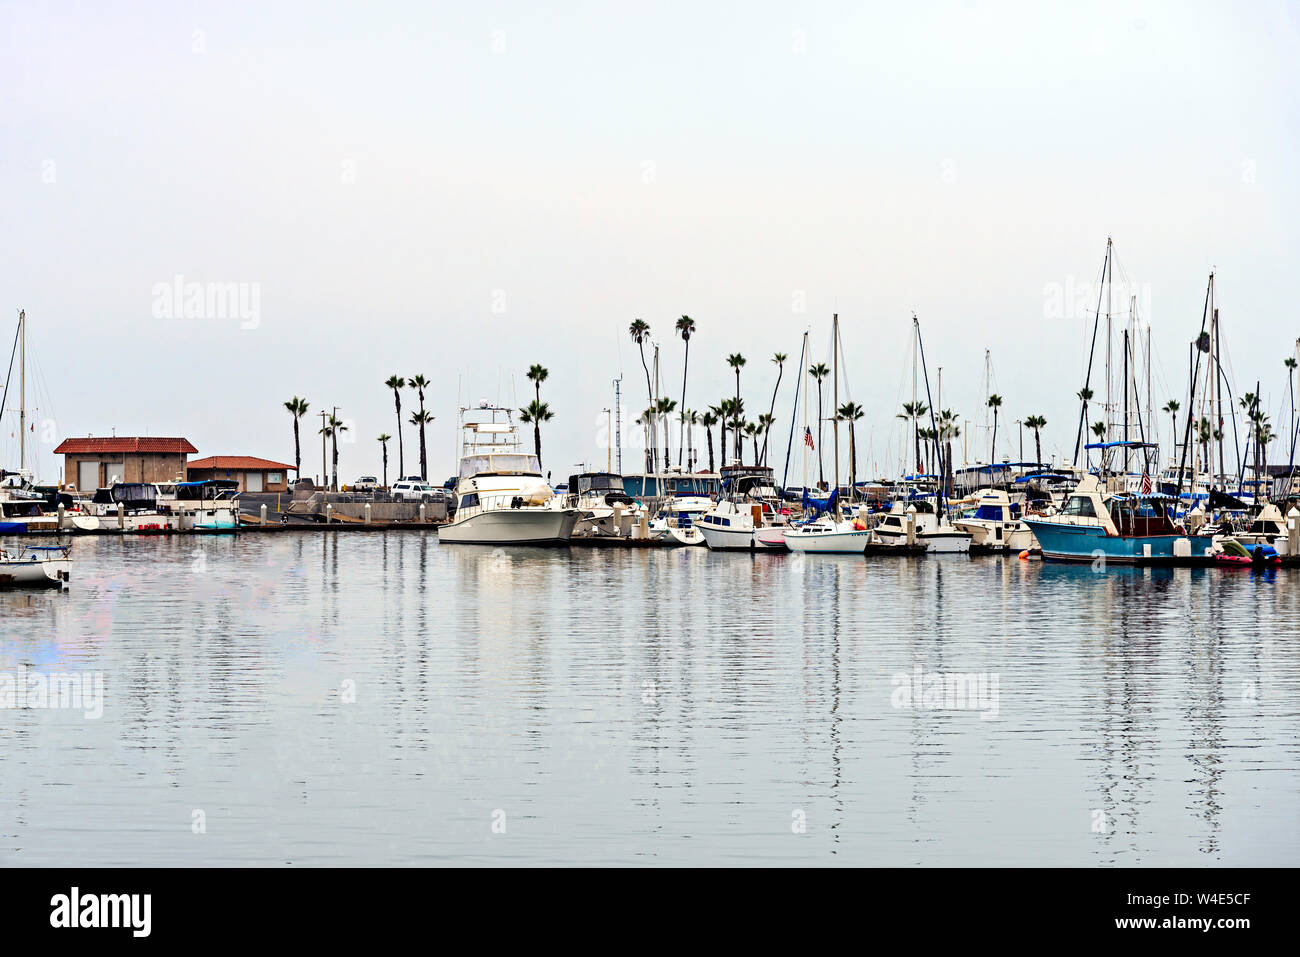 Calm water in a marina with docked boats. Stock Photo